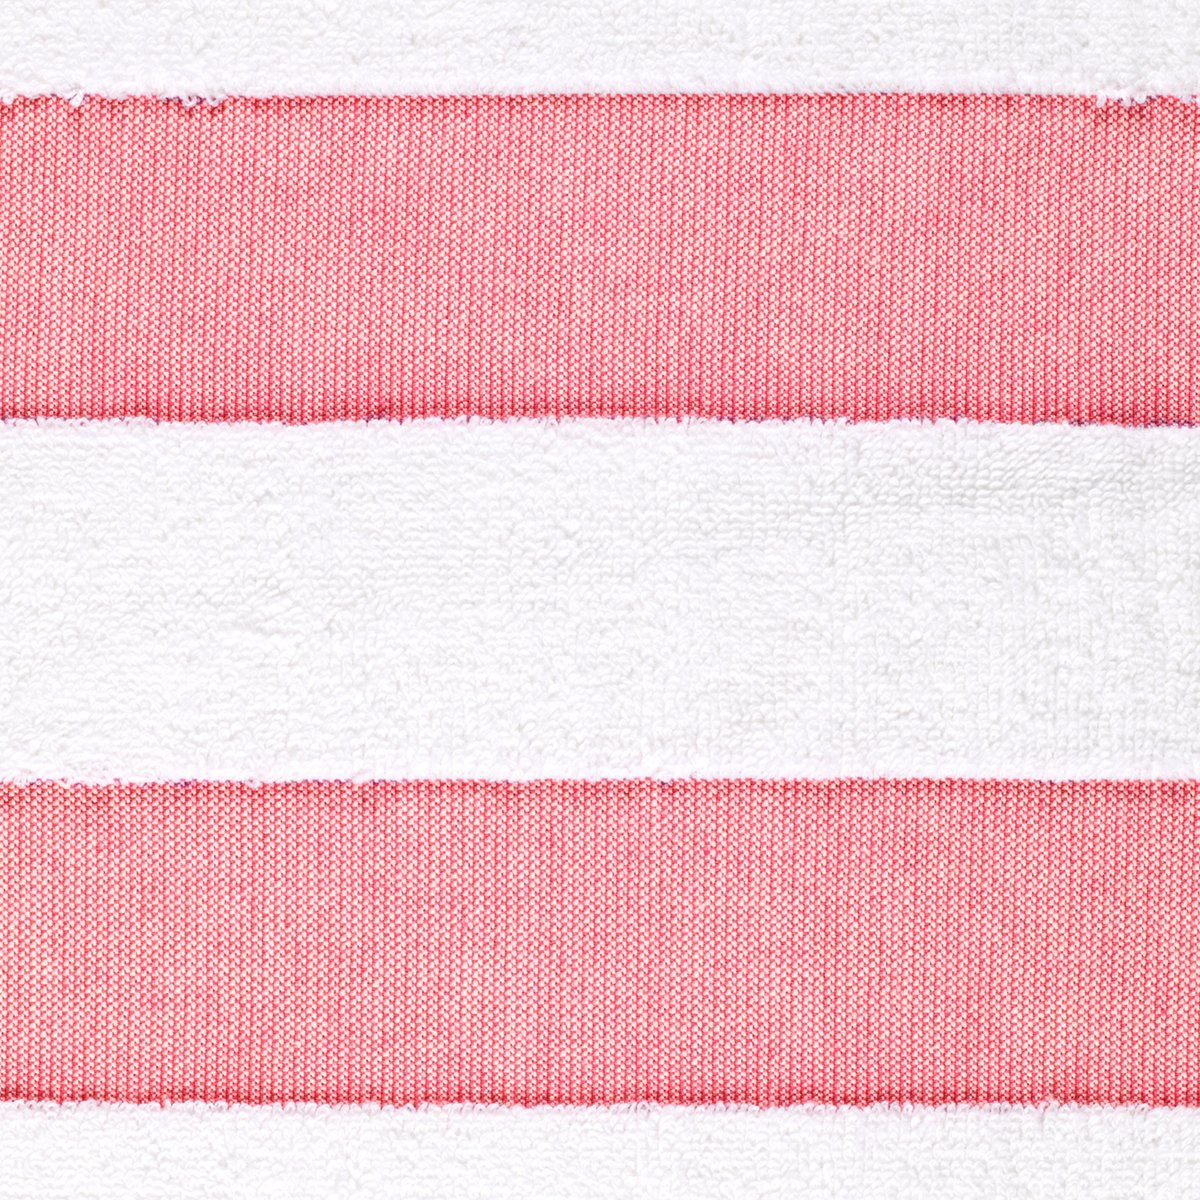 Swatch Sample of Matouk Amado Pool and Beach Towels in Red Stripe Color